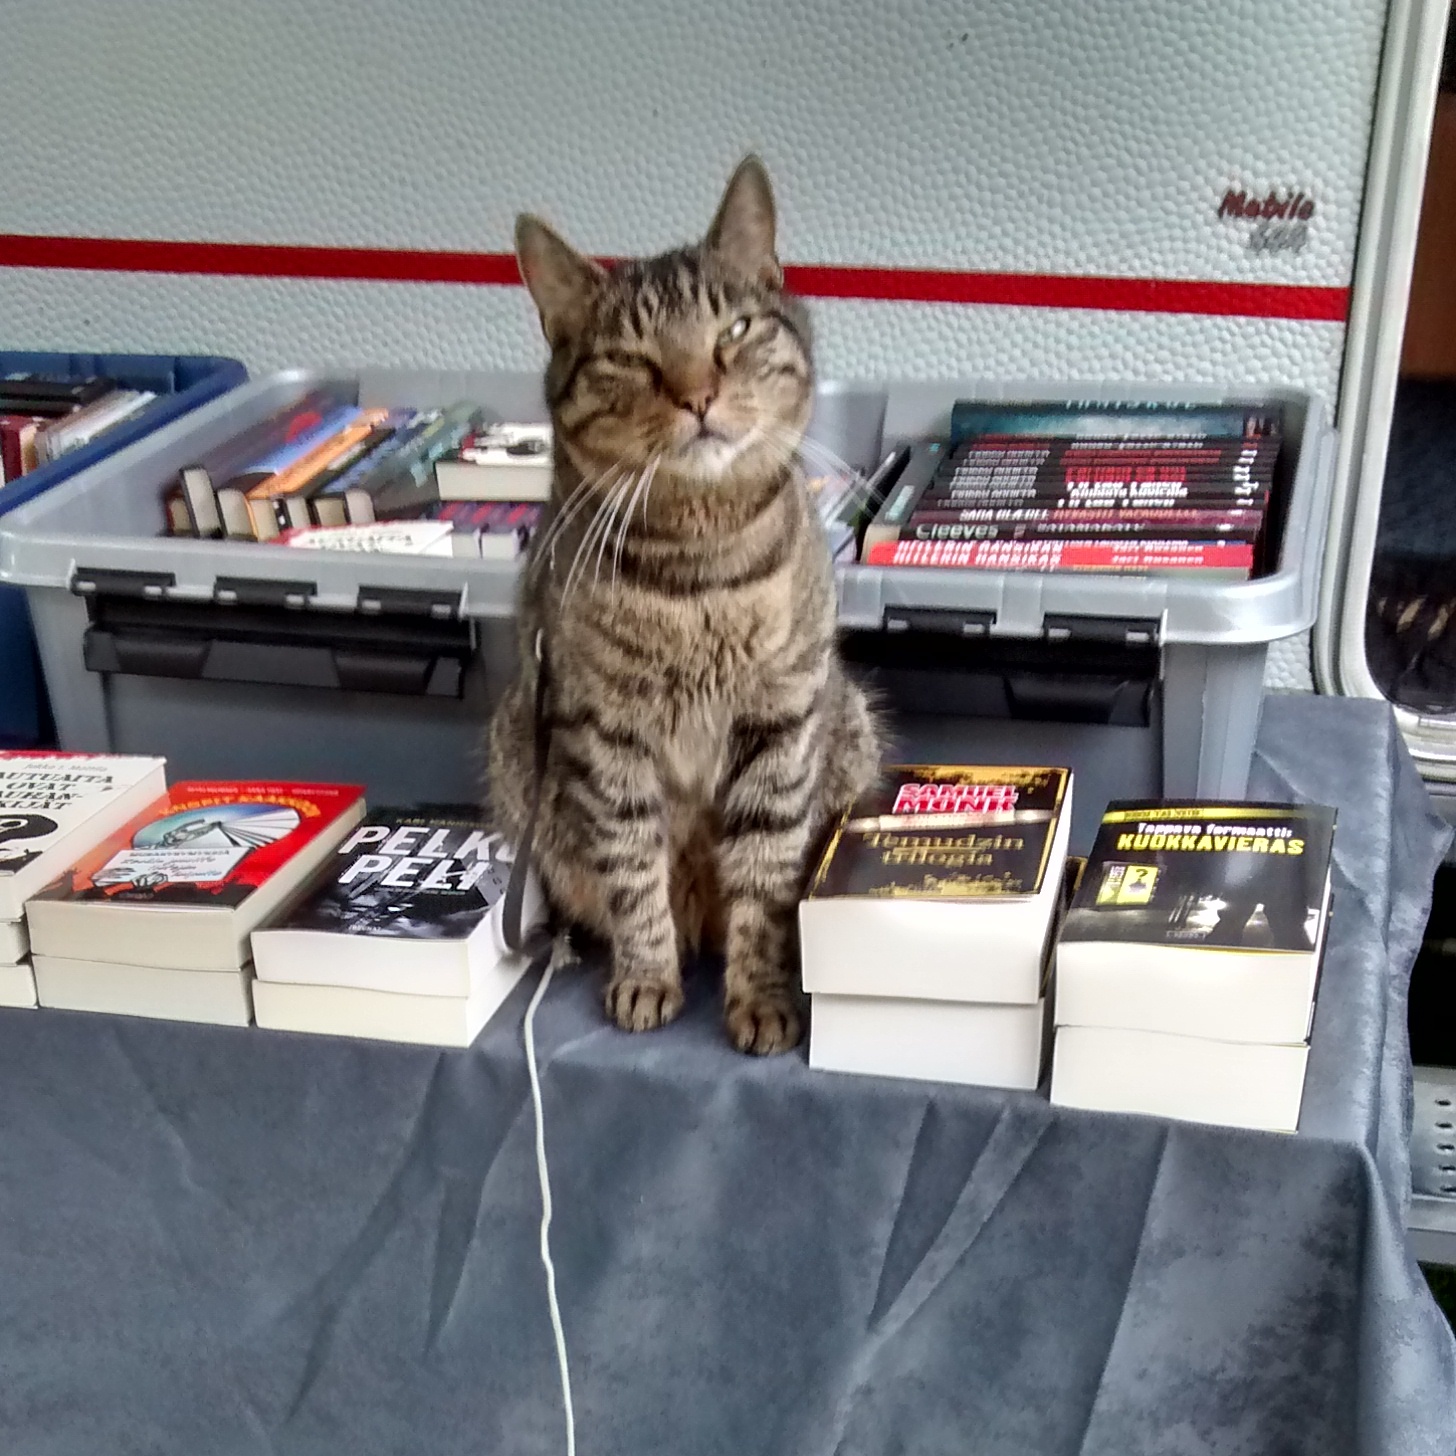 The undoubted star of the show at the Dekkarit Festival... the bookshop cat.